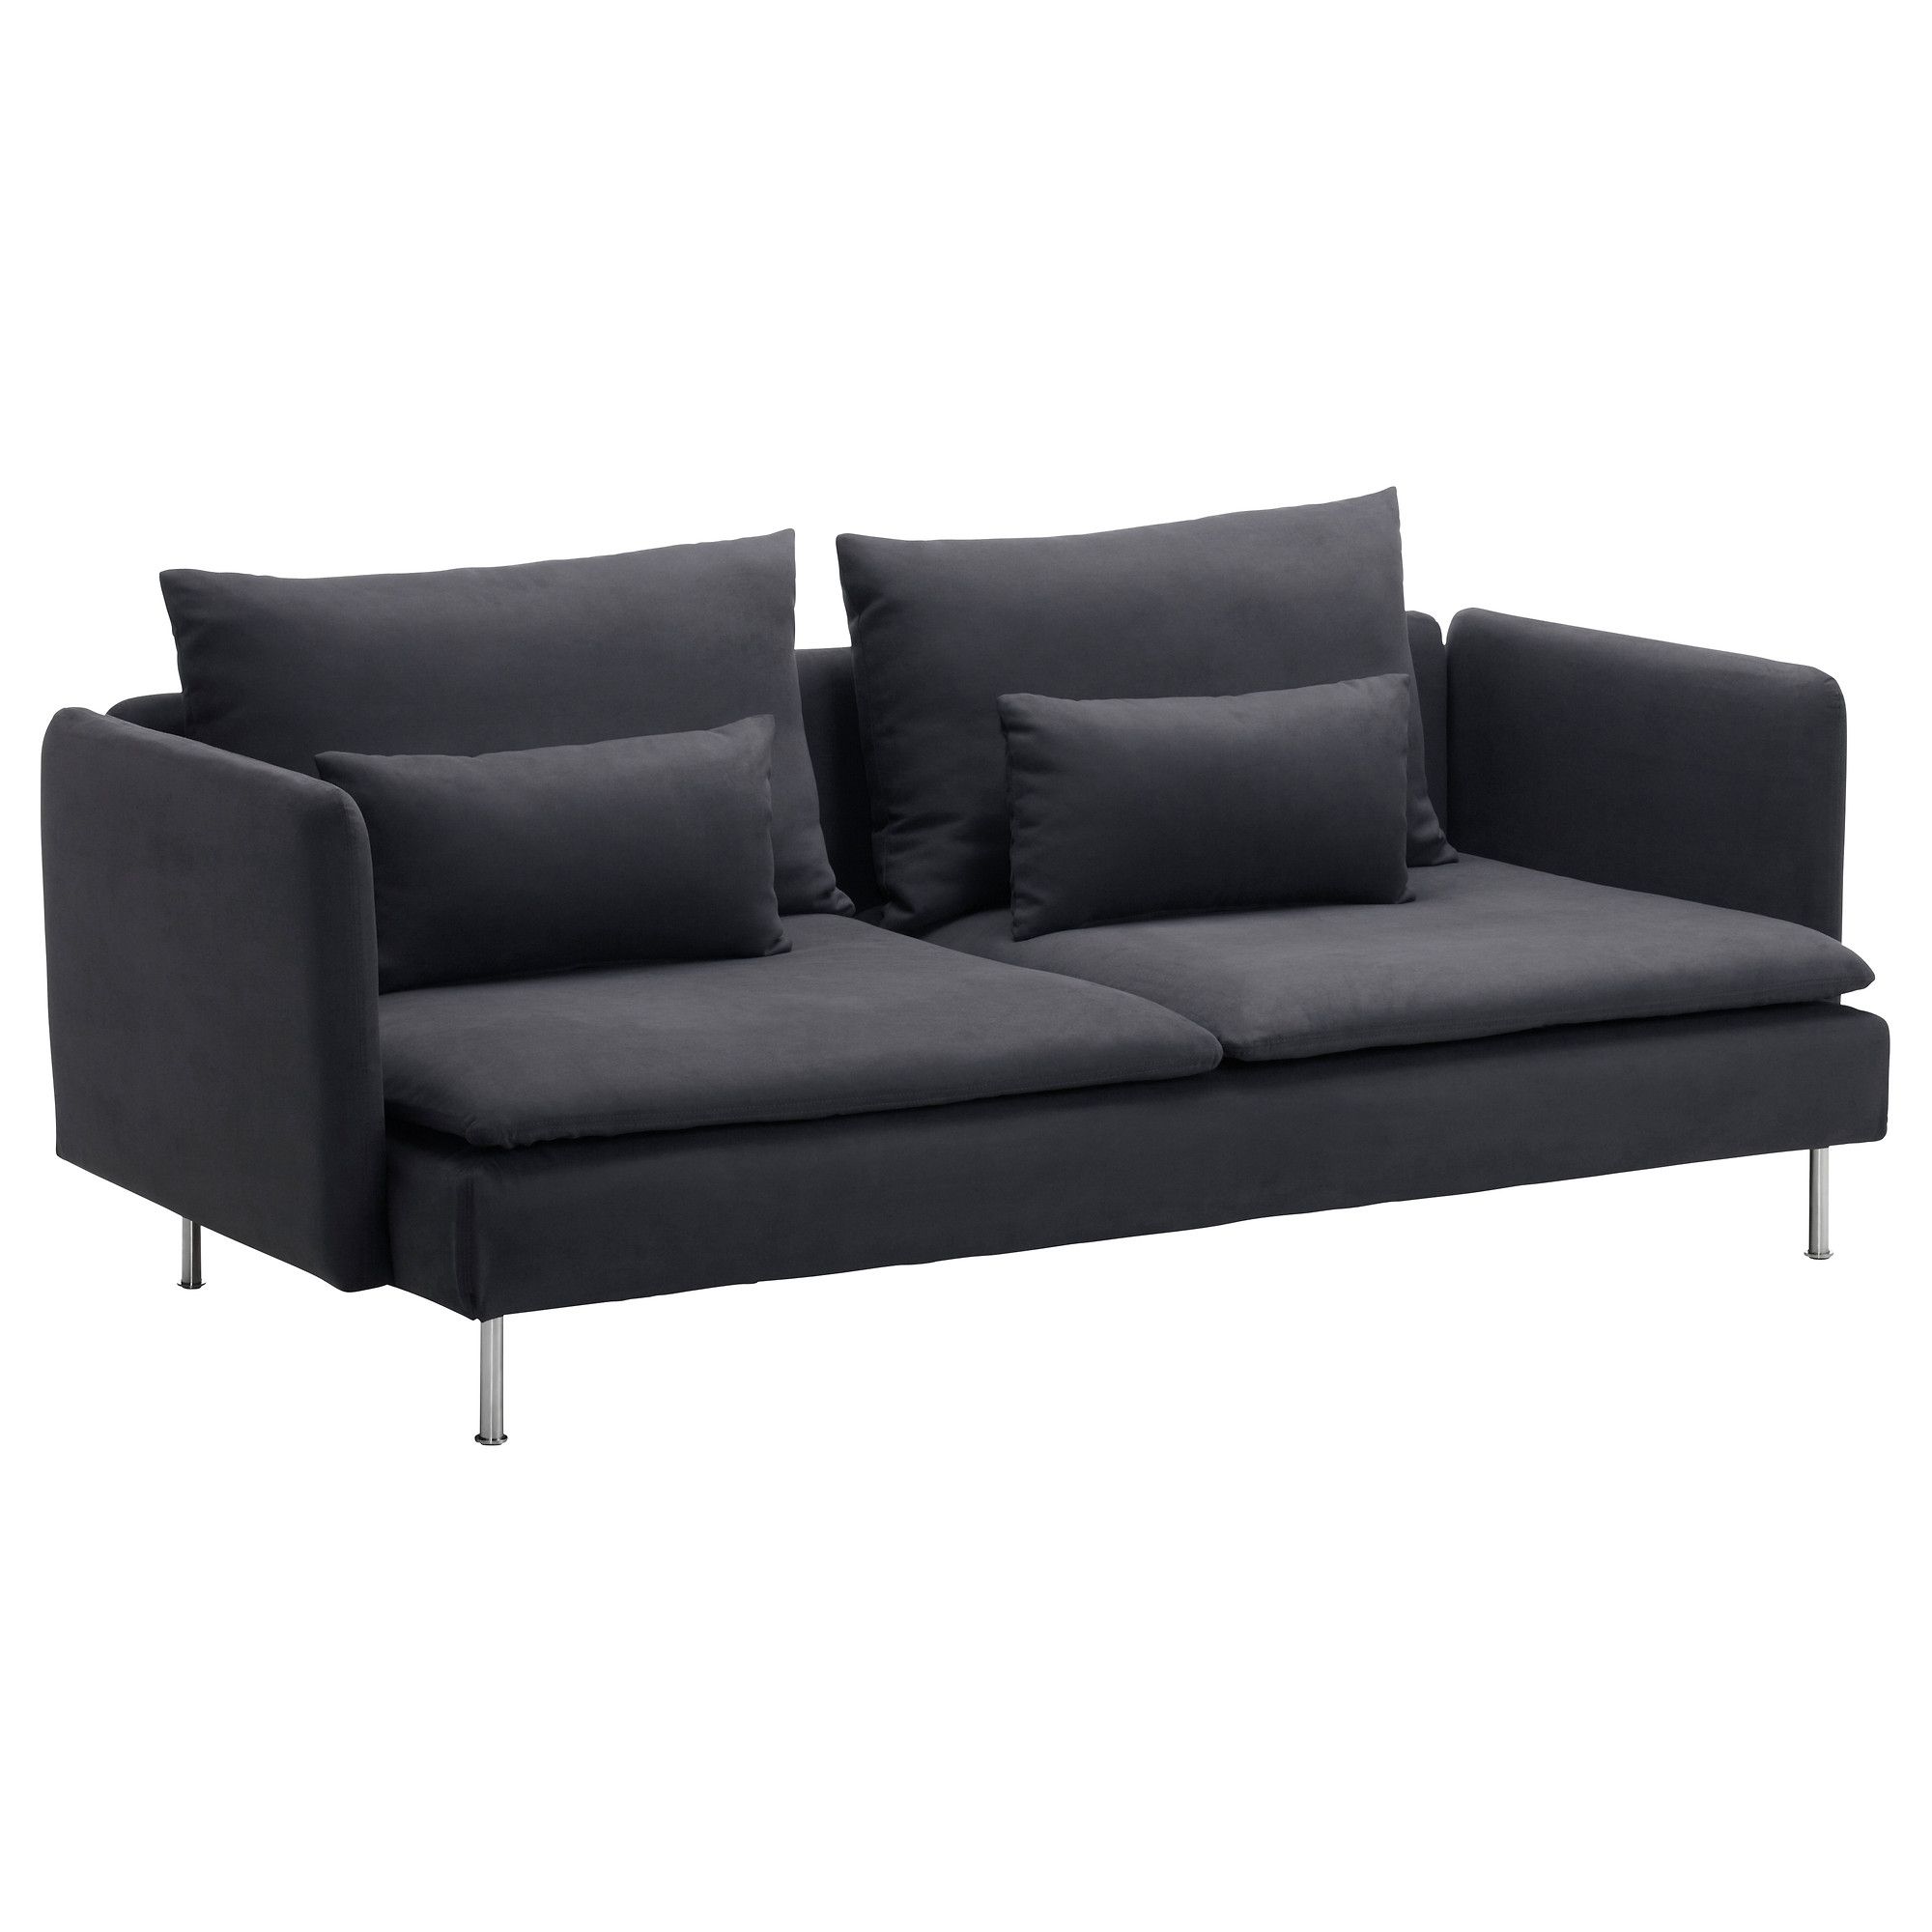 Söderhamn Sofa – Samsta Dark Gray – Ikea Inside Most Current Ikea Chaise Couches (View 11 of 15)